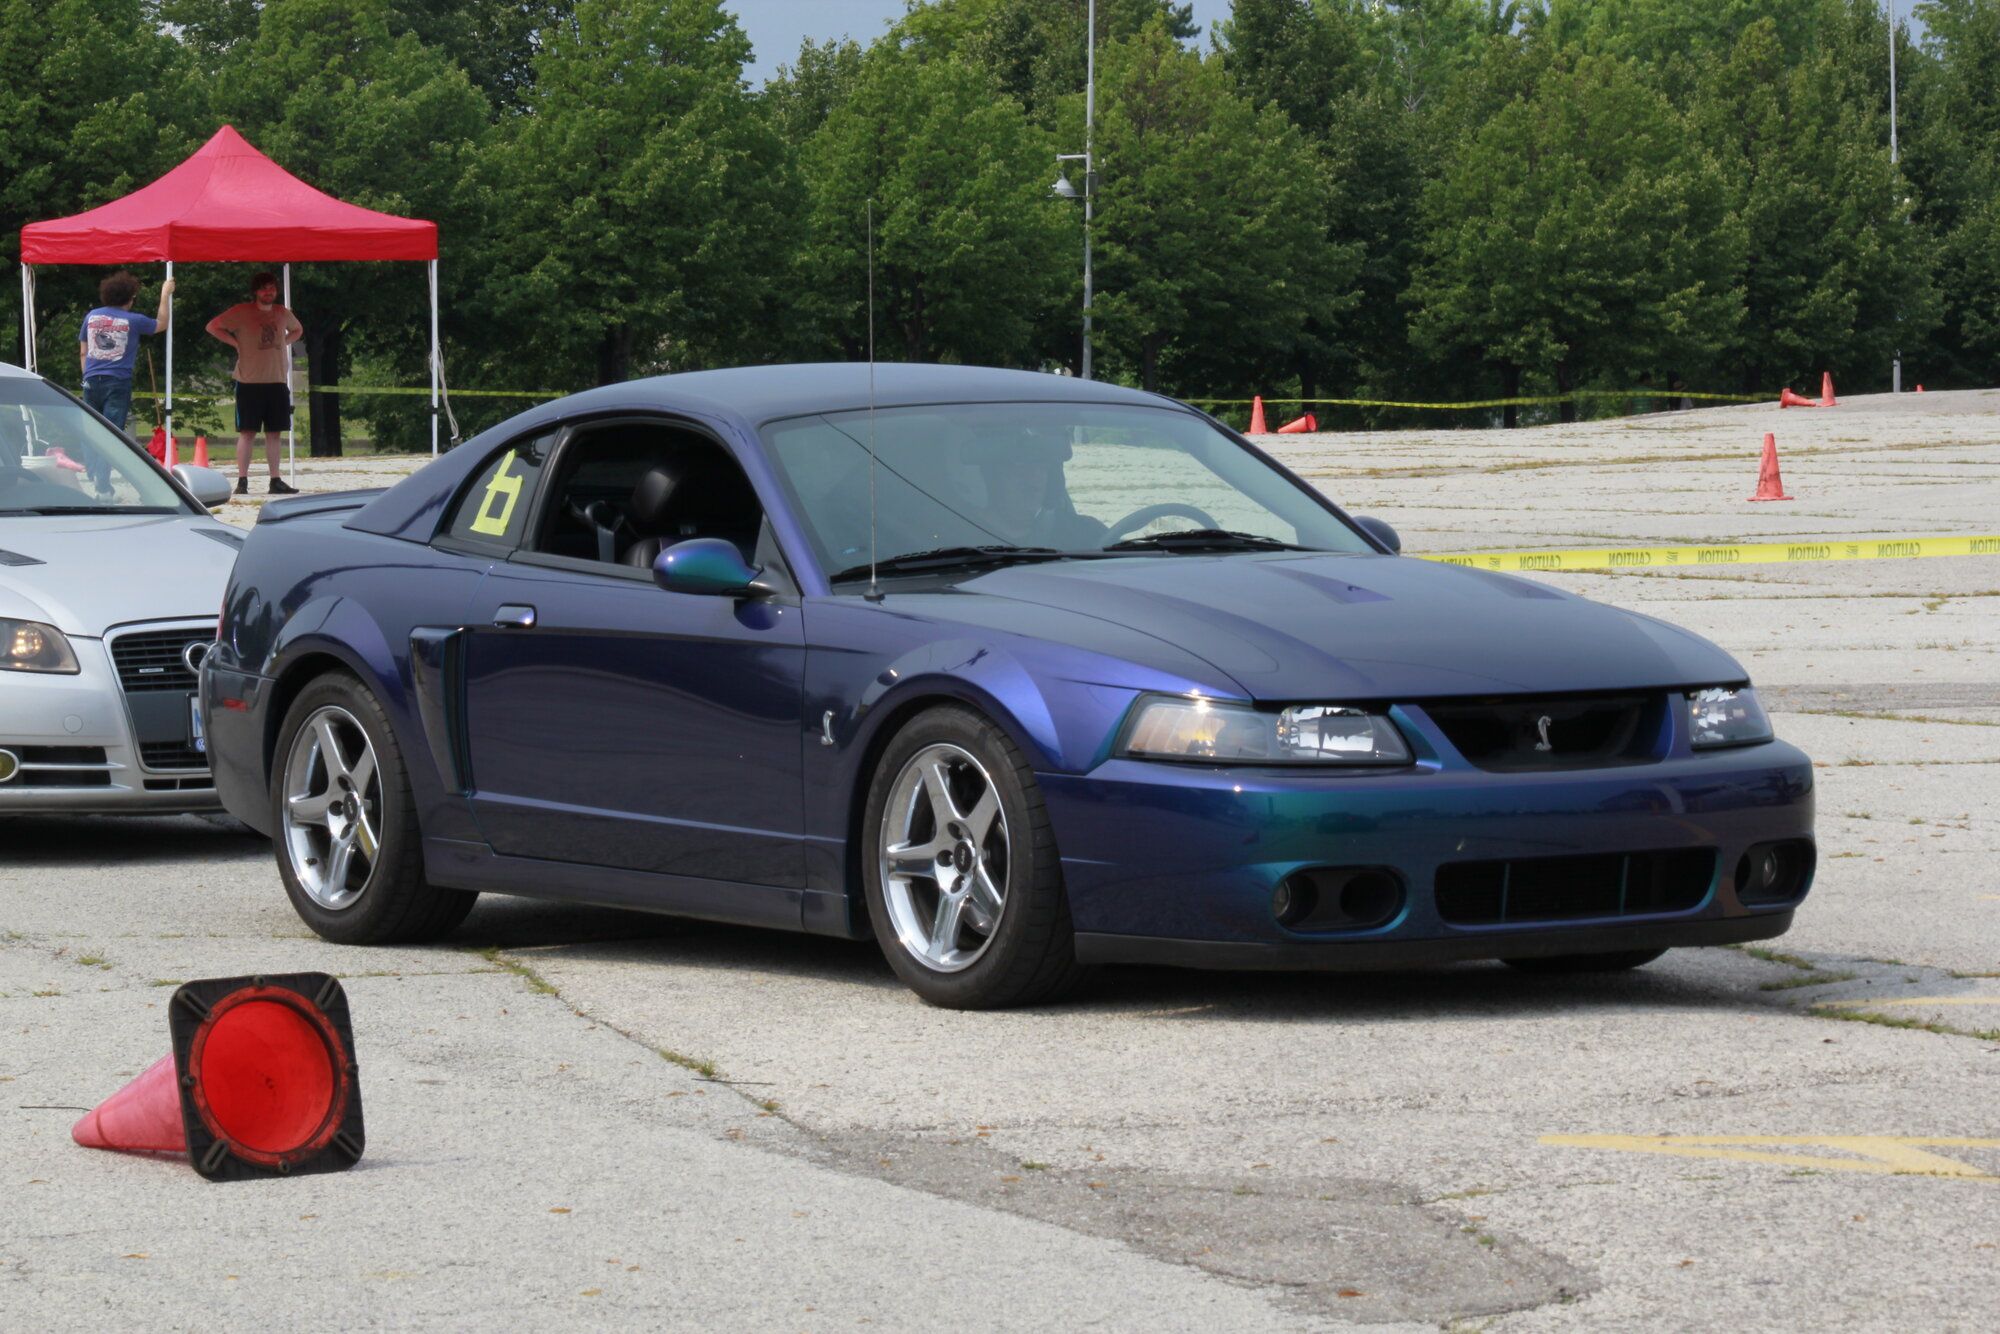 2004 Mustang
('04 Mystichrome Mustang Track Car)